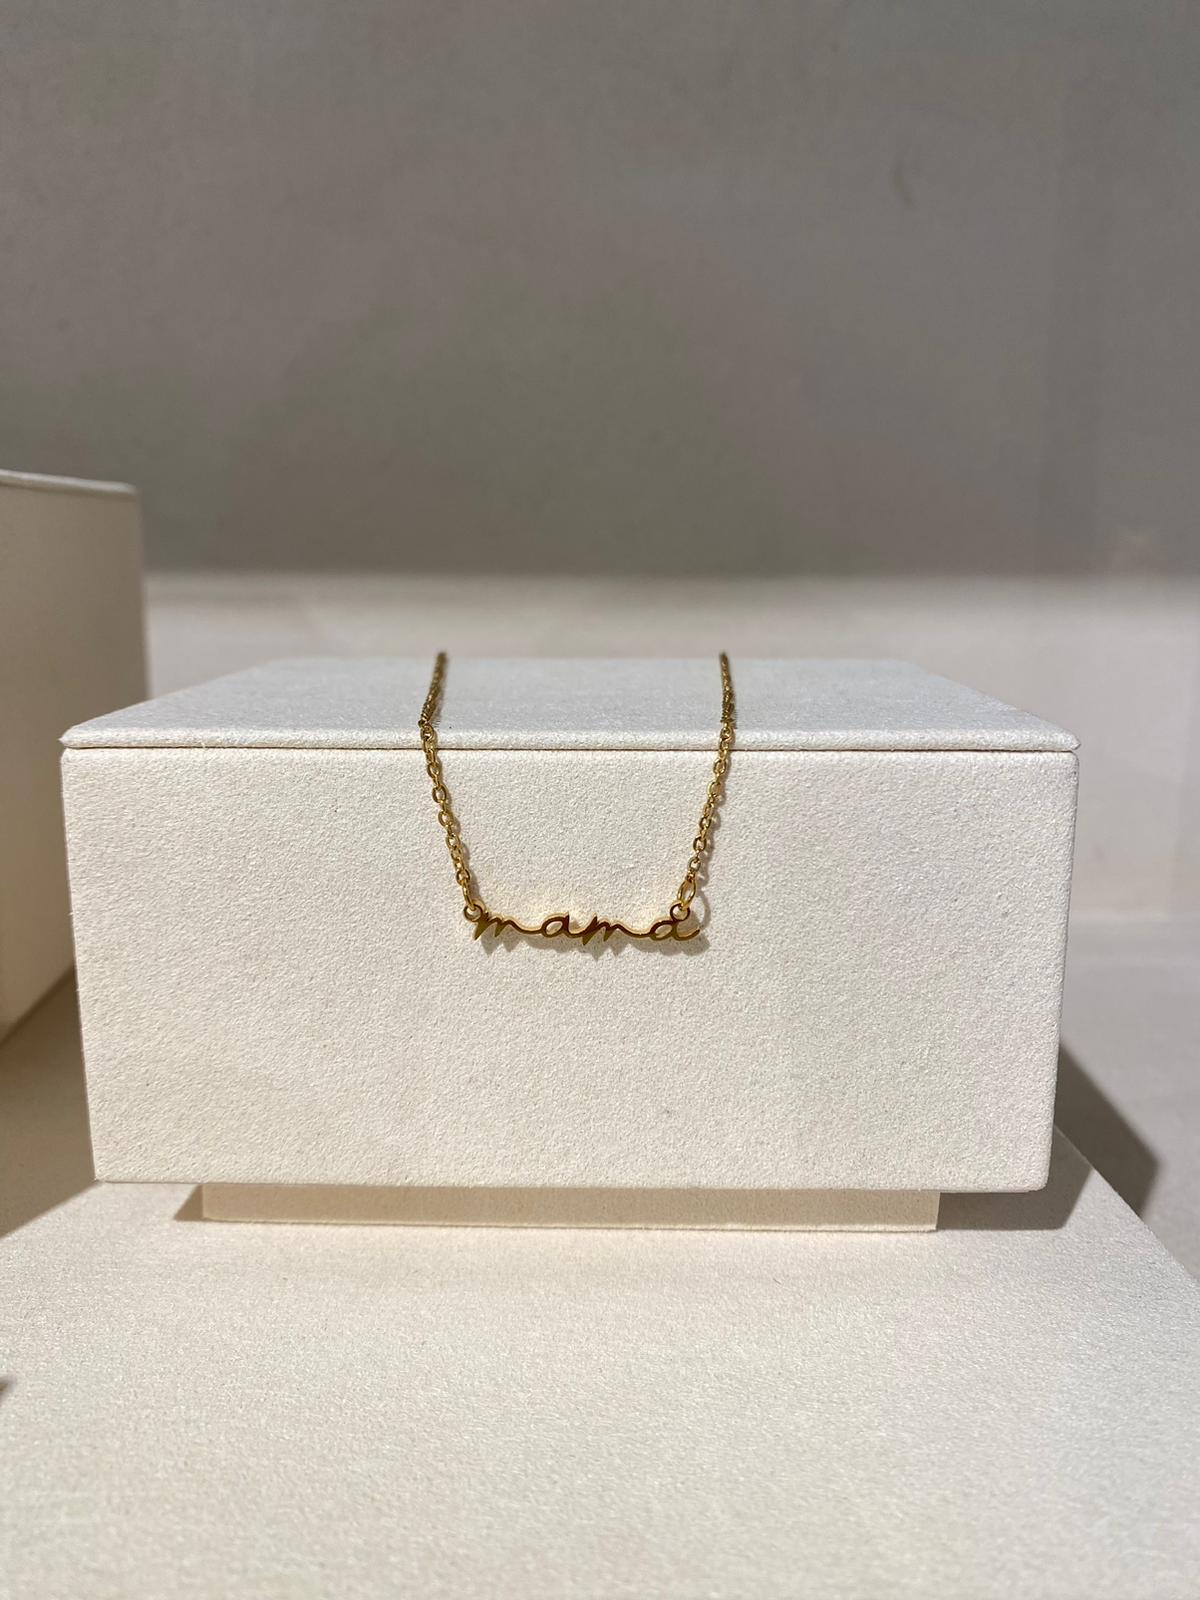 Dainty "Mama" Necklace - Gold/Silver